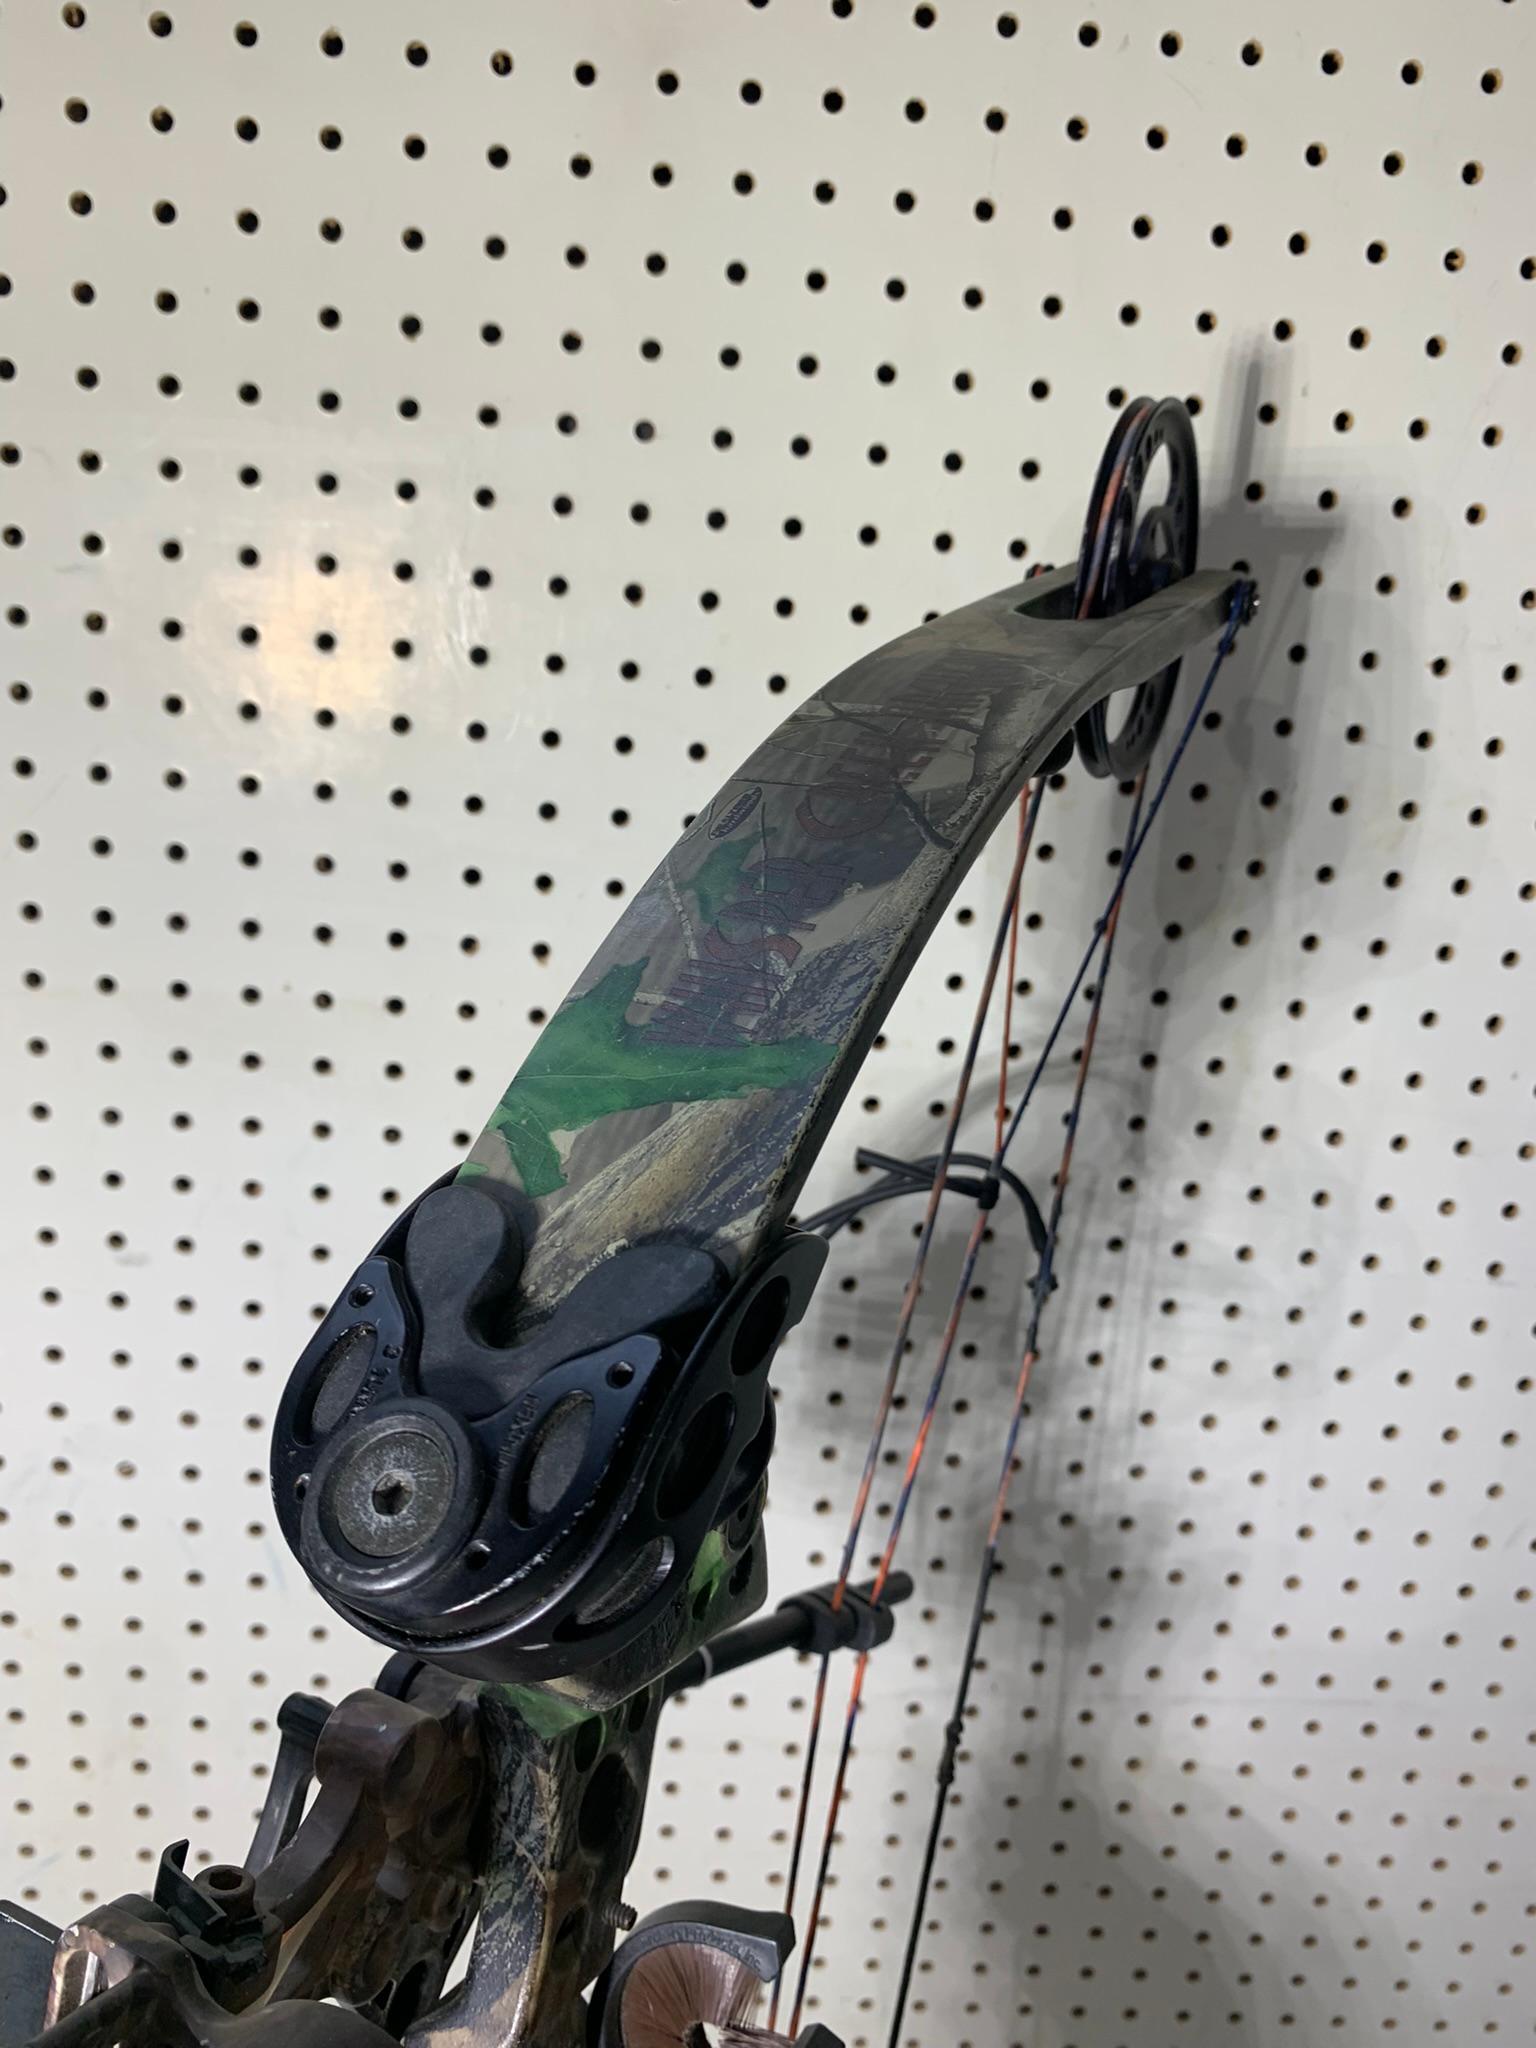 Whisper Creek Archery Extreme 3 Pin Site Stroker SS Compound Bow